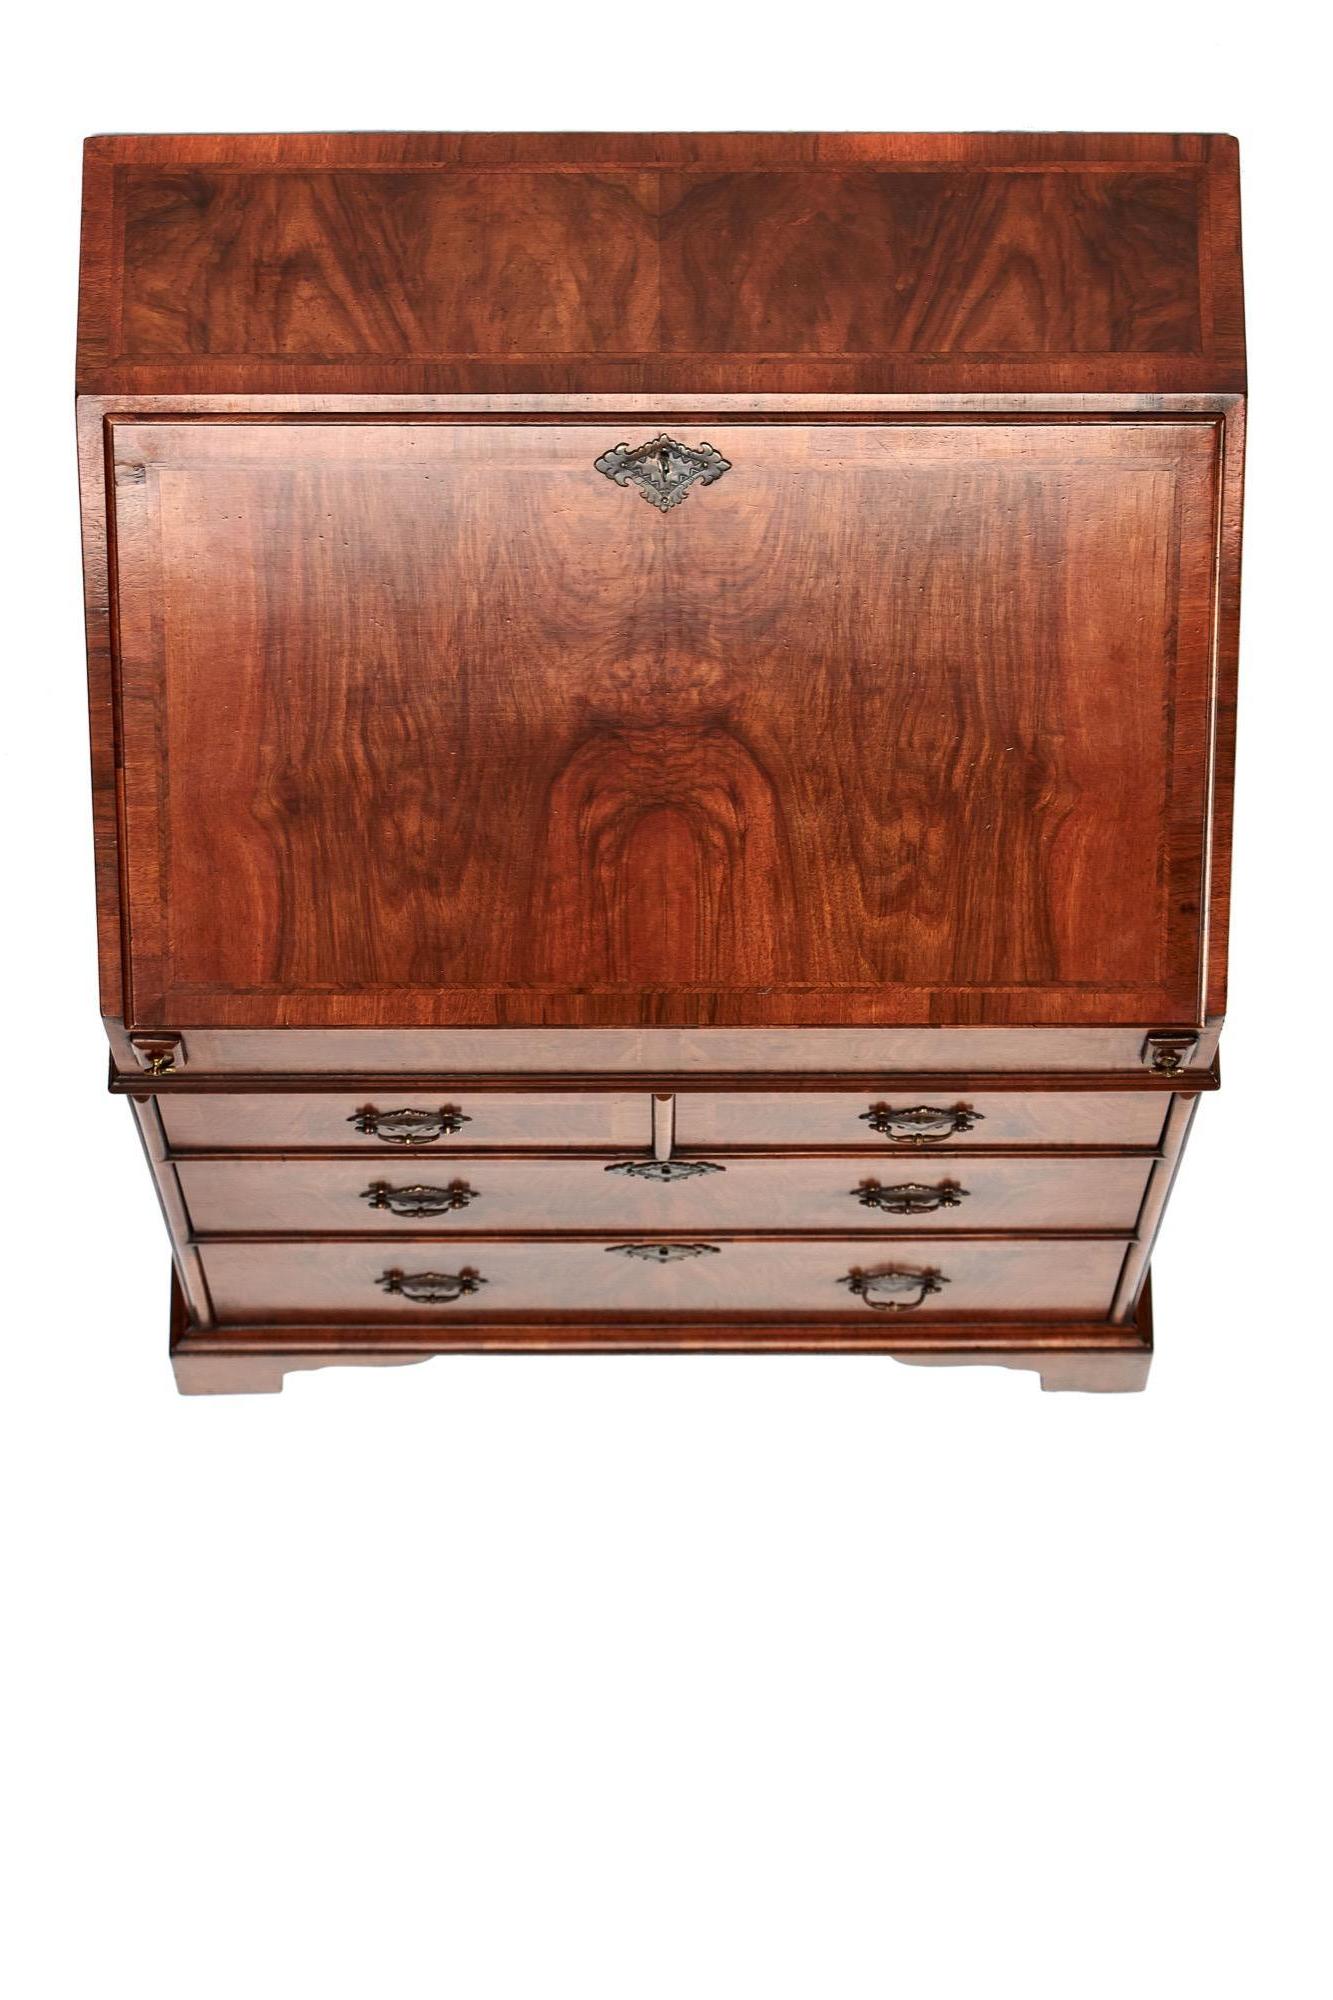 Antique Queen Anne revival burr walnut bureau having a beautiful burr walnut top, burr walnut fall opening to reveal a fitted interior consisting of pigeon holes, drawers, centre cupboard and drop well compartment, four burr walnut drawers with